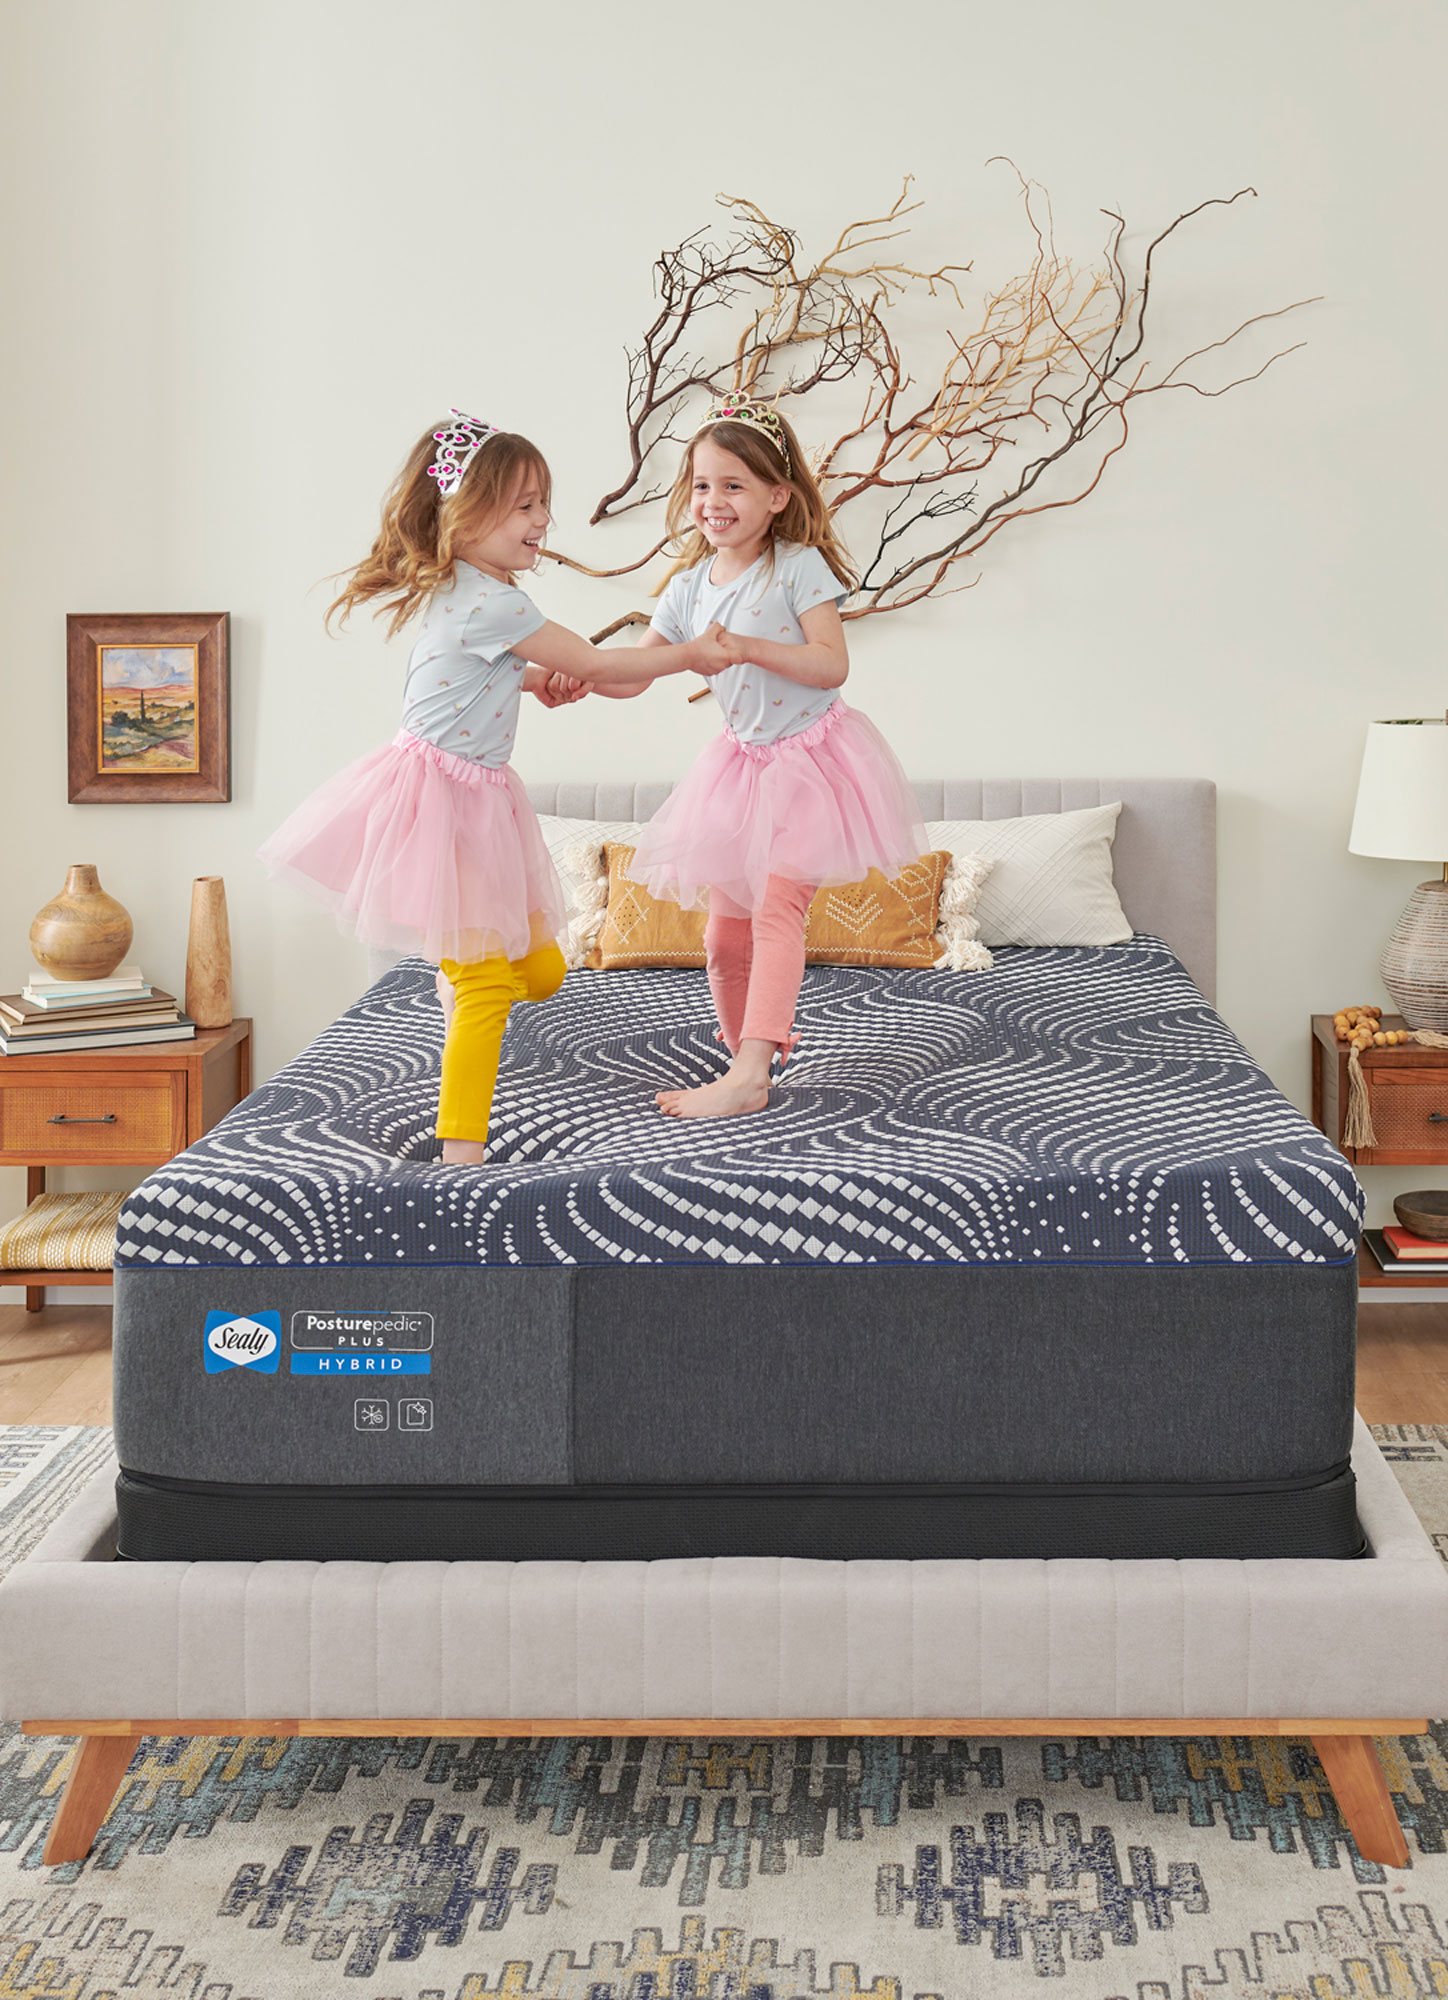 Young girls jumping on Sealy mattress